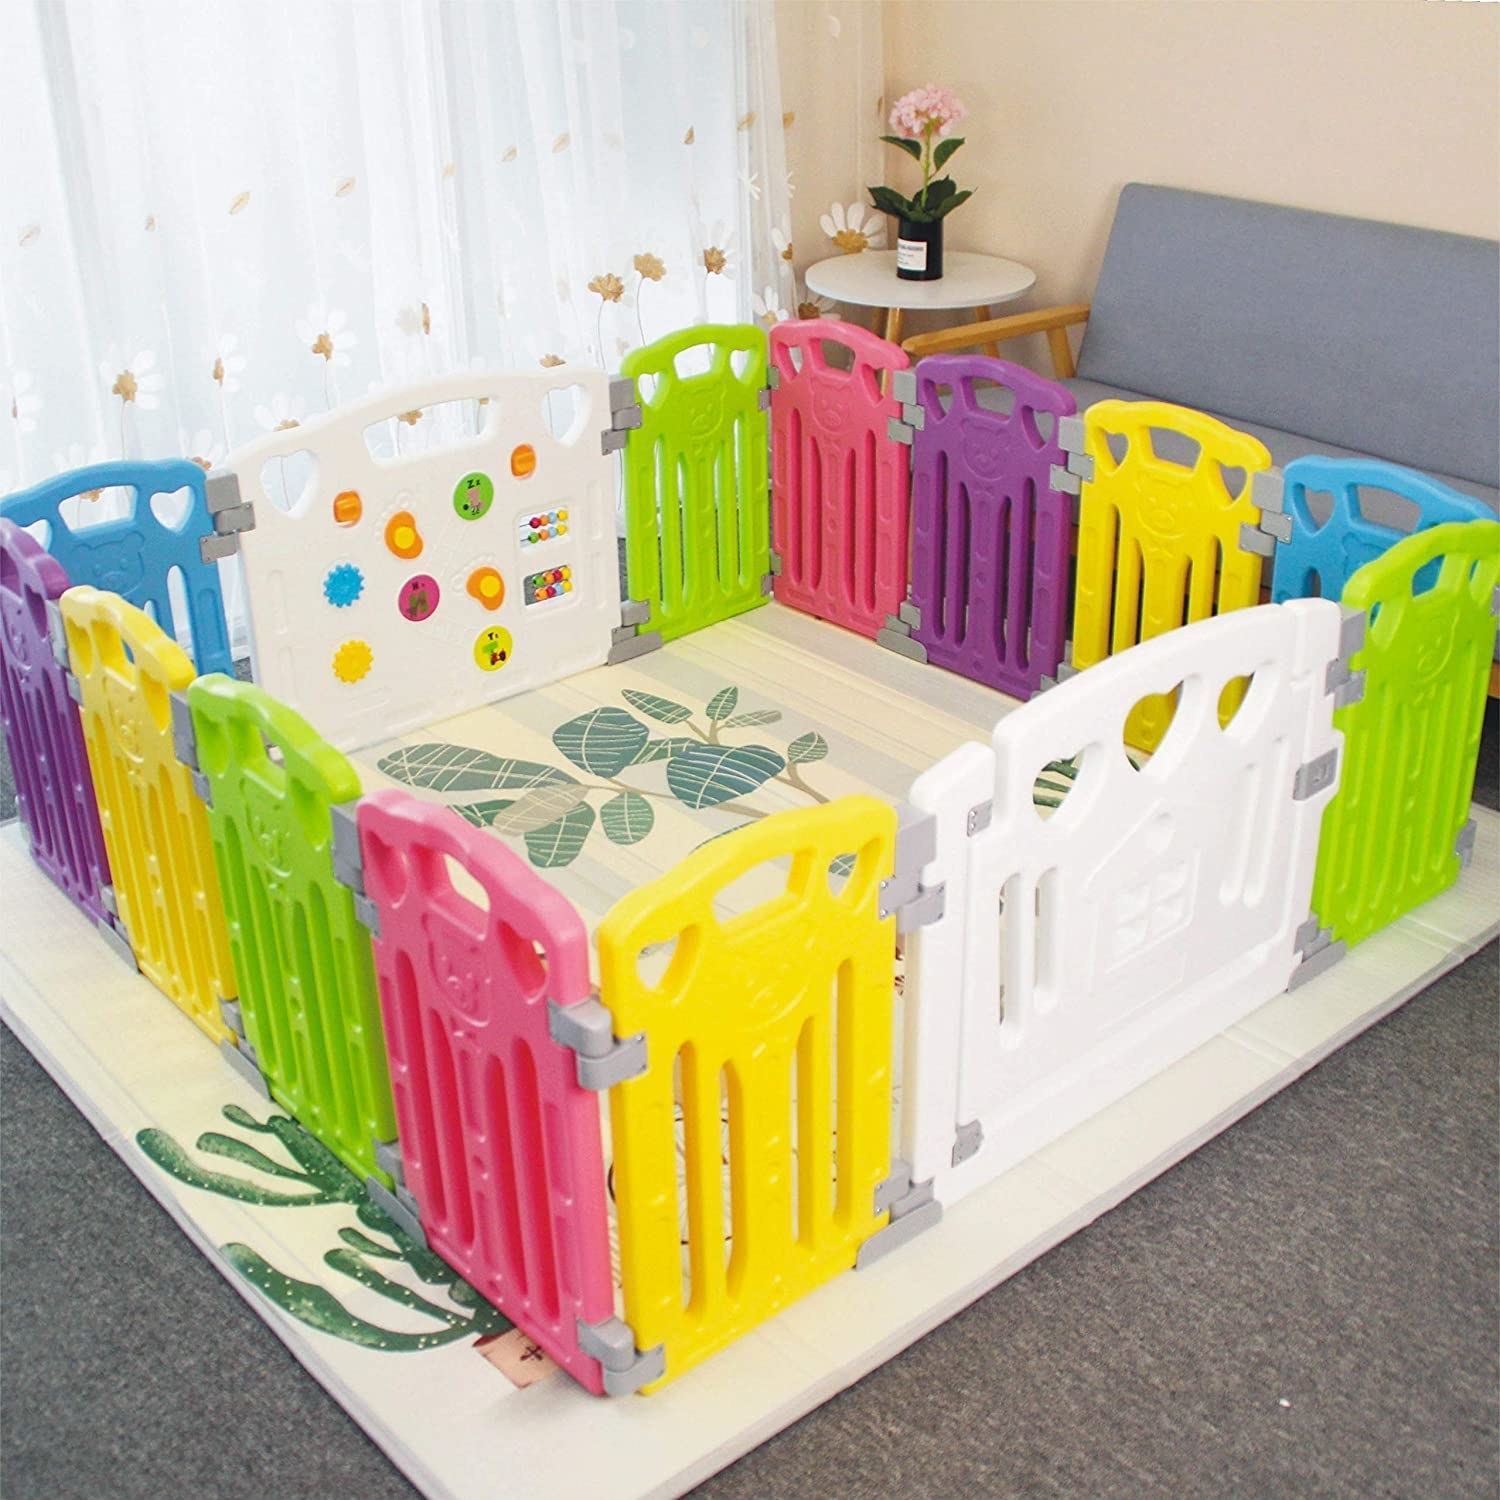 The play pen assembled inside a house